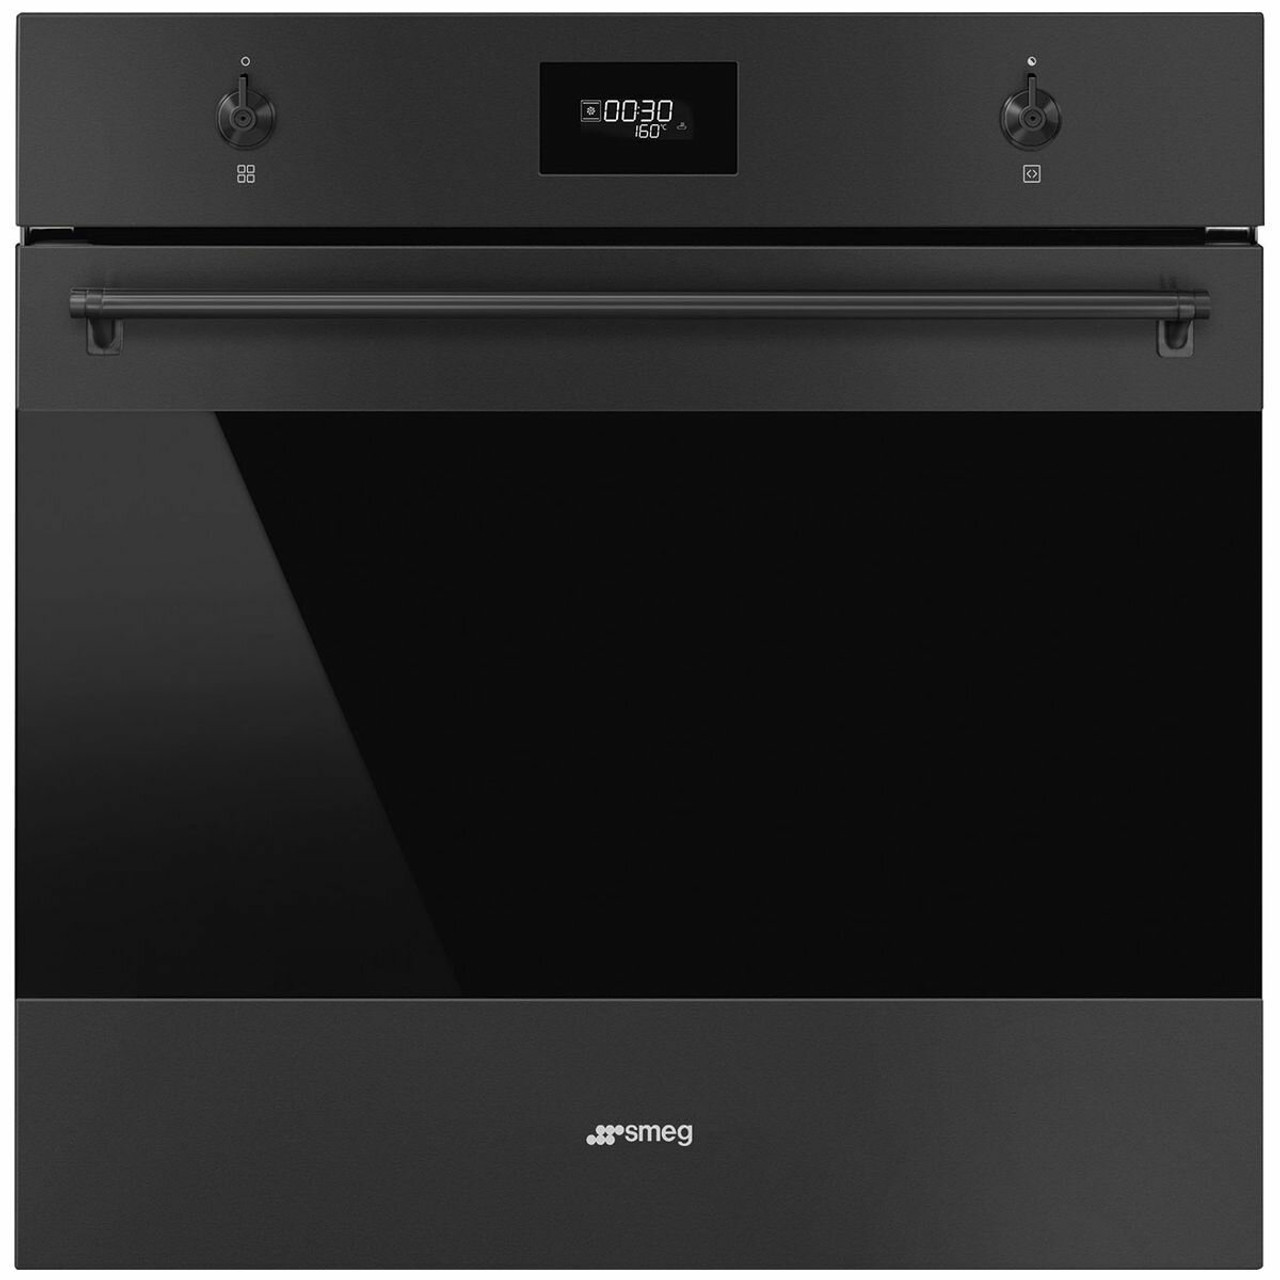 SOPA6301TN - 60cm Classic Pyrolytic Oven - Black Stainless Steel